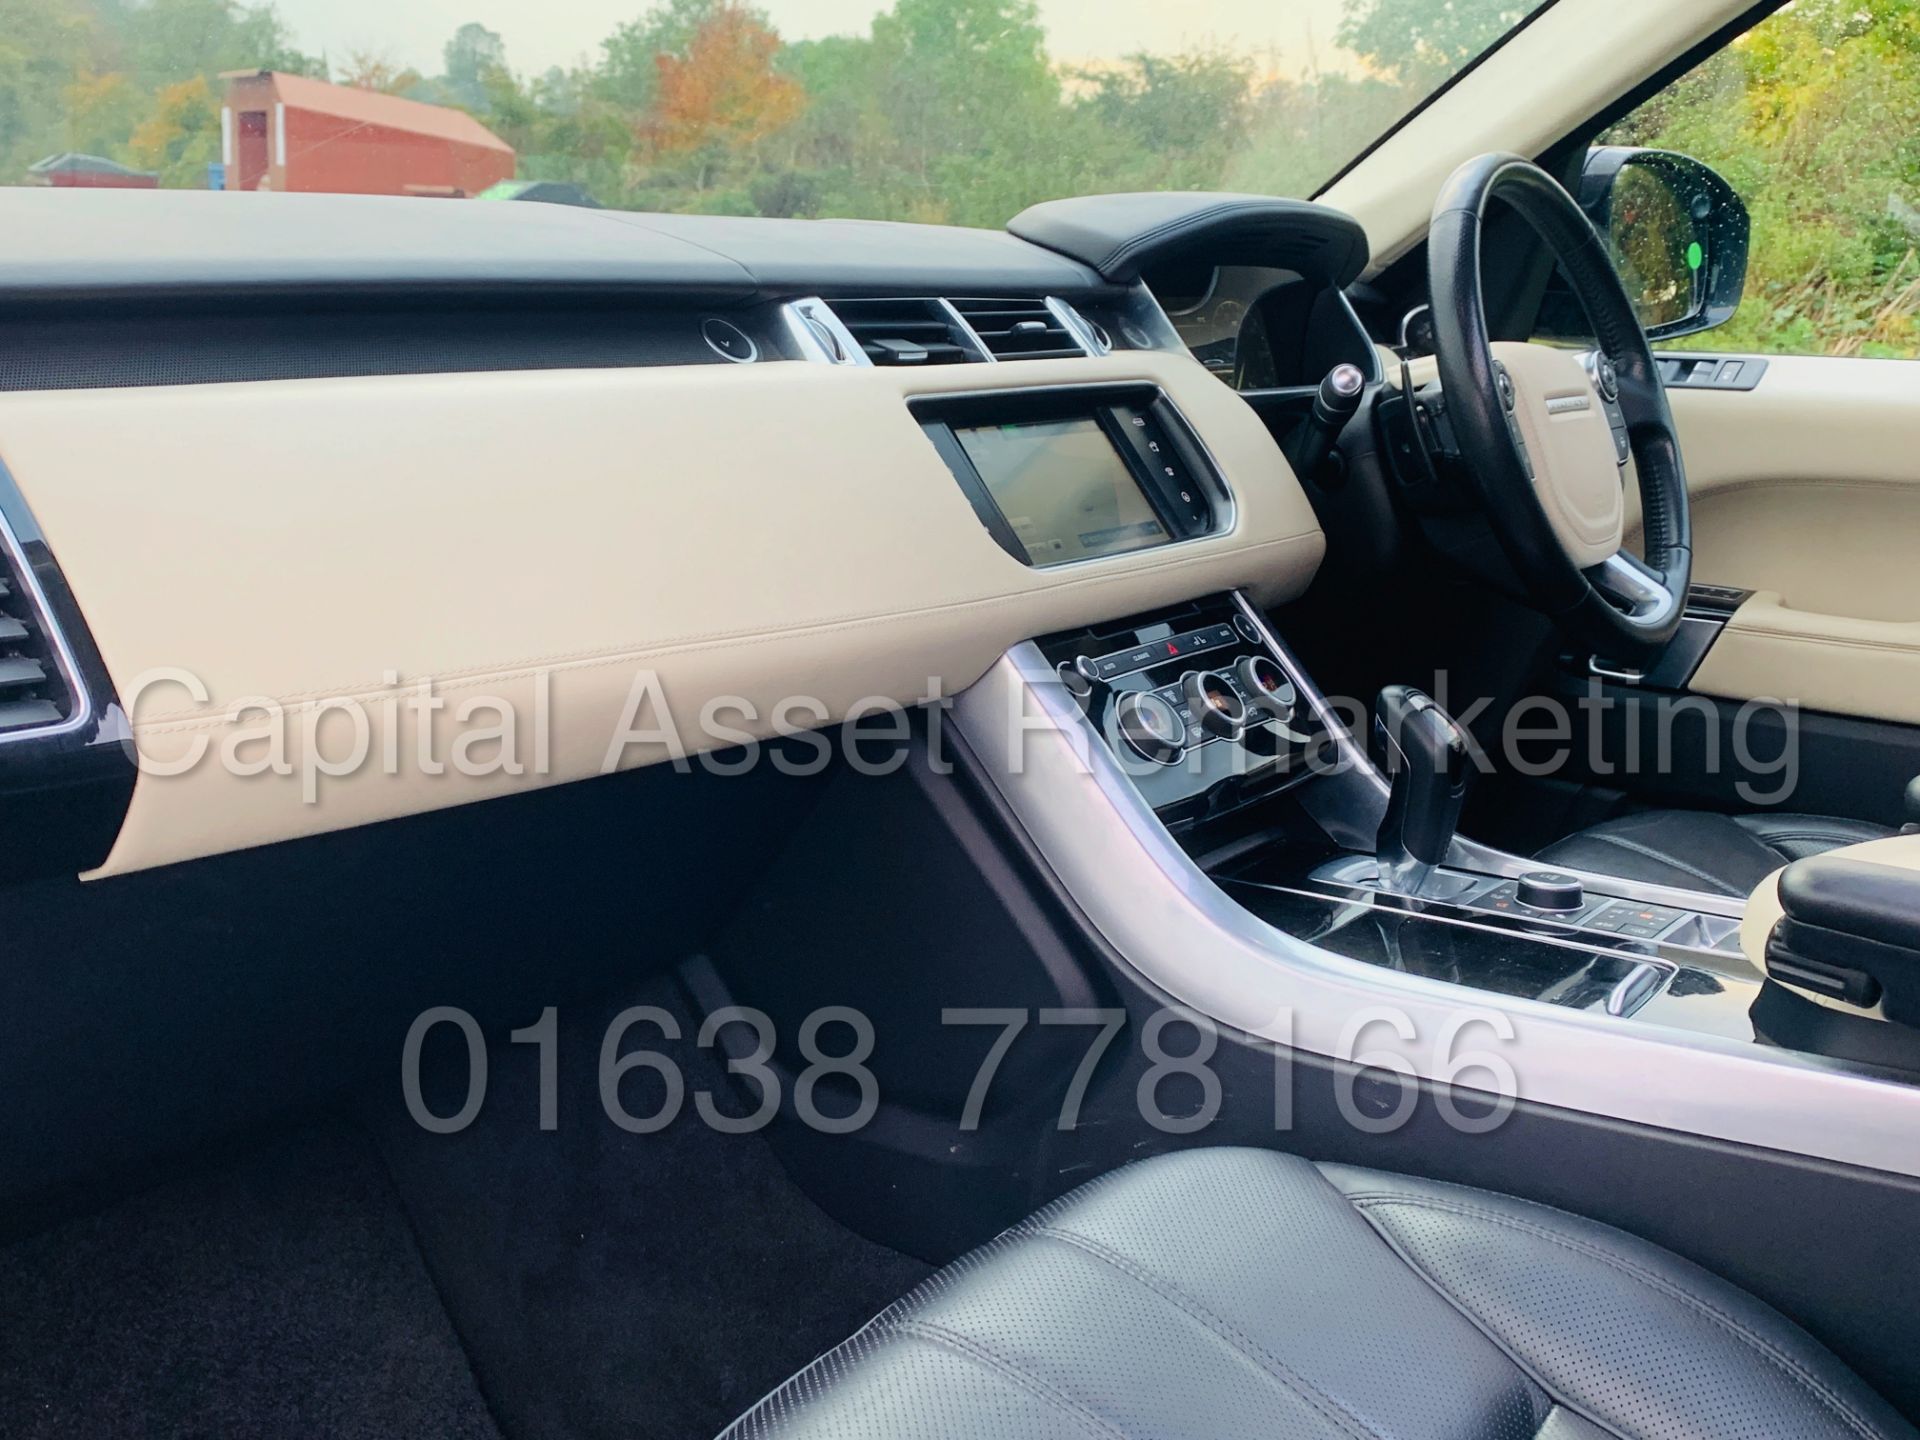 (ON SALE) RANGE ROVER SPORT 3.0 SDV6 *AUTOBIOGRAPHY DYNAMIC*AUTO *FULLY LOADED* MONSTER SPEC *16 REG - Image 23 of 70